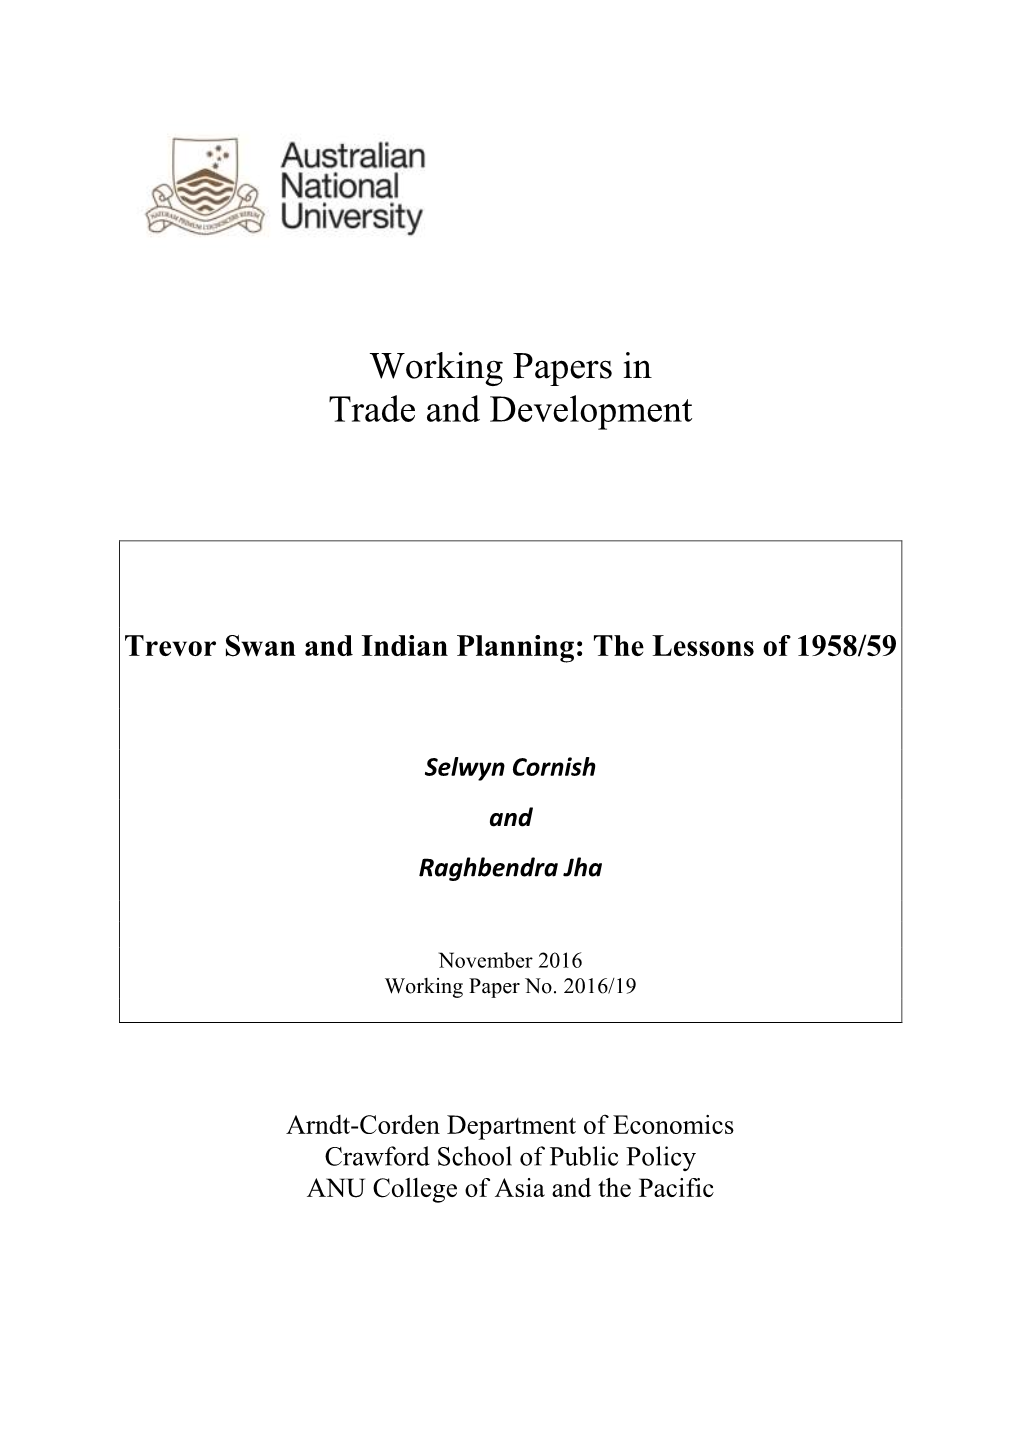 Trevor Swan and Indian Planning: the Lessons of 1958/59